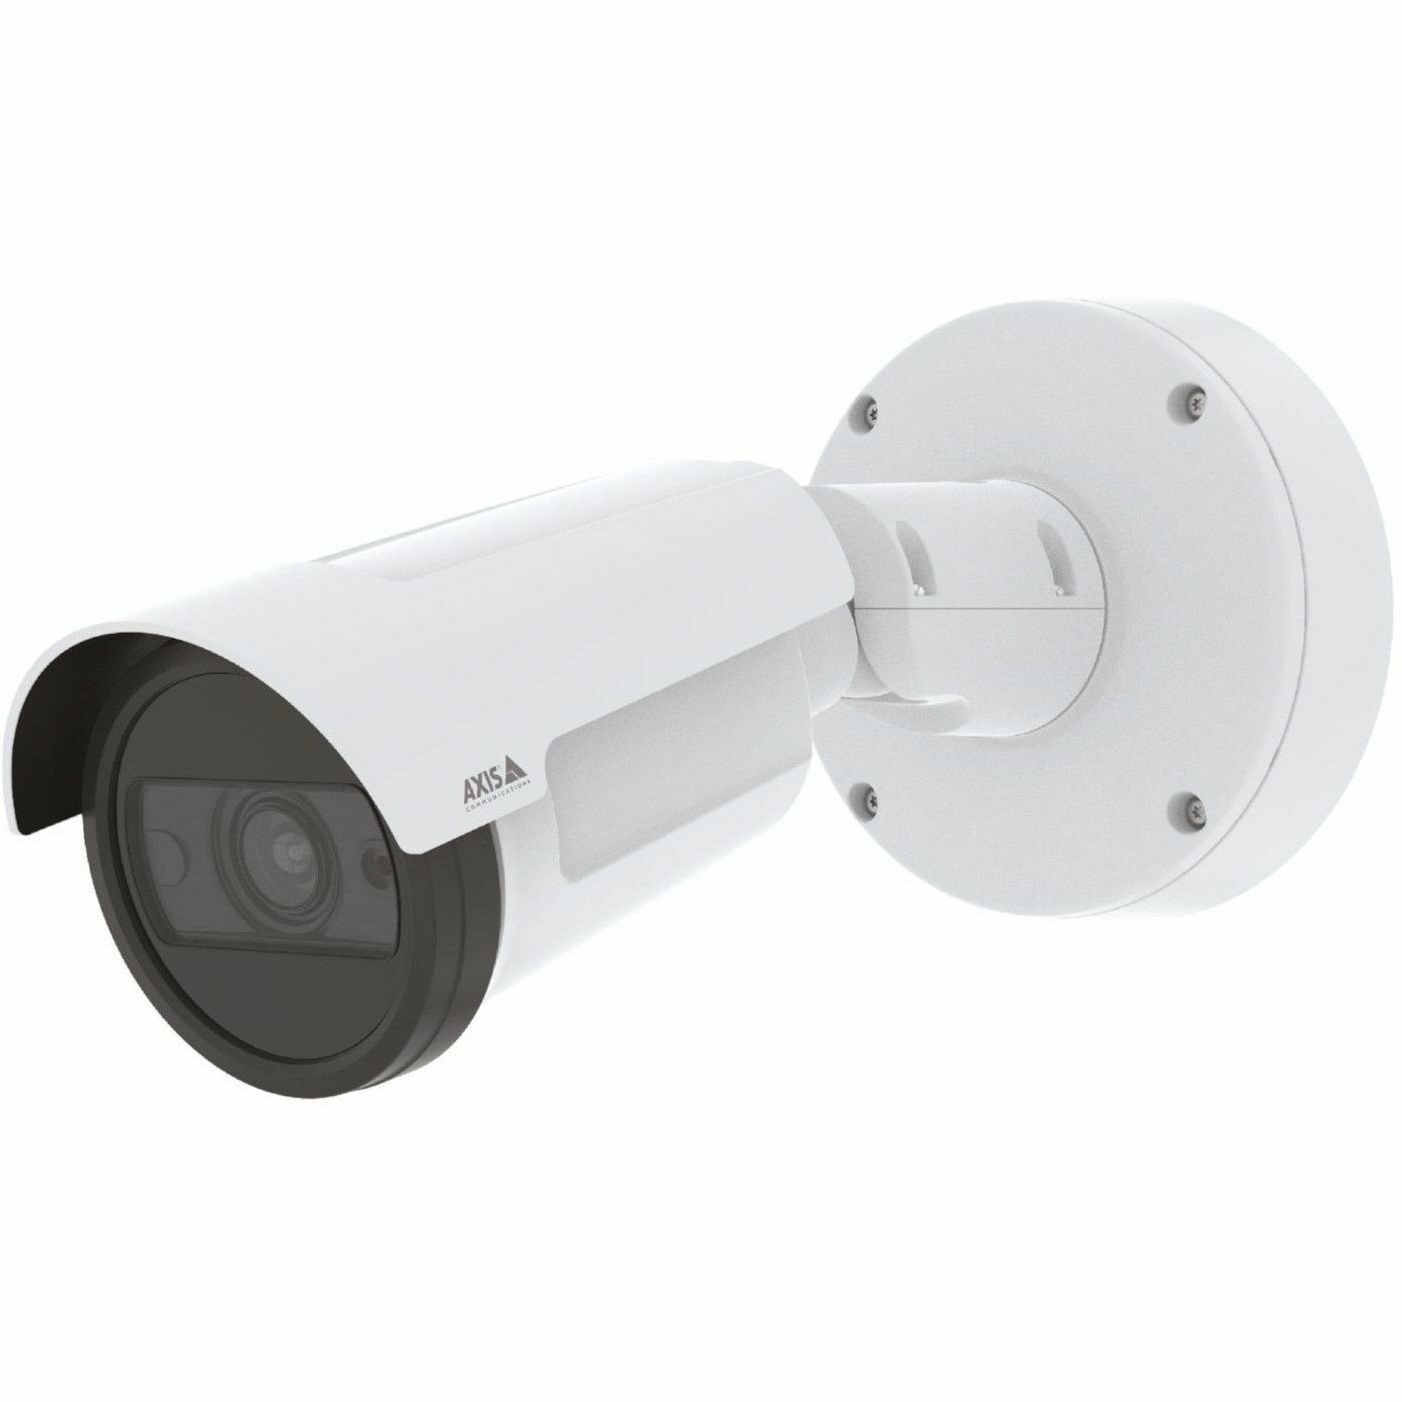 AXIS P1465-LE-3 Outdoor Full HD Network Camera - Color - Bullet